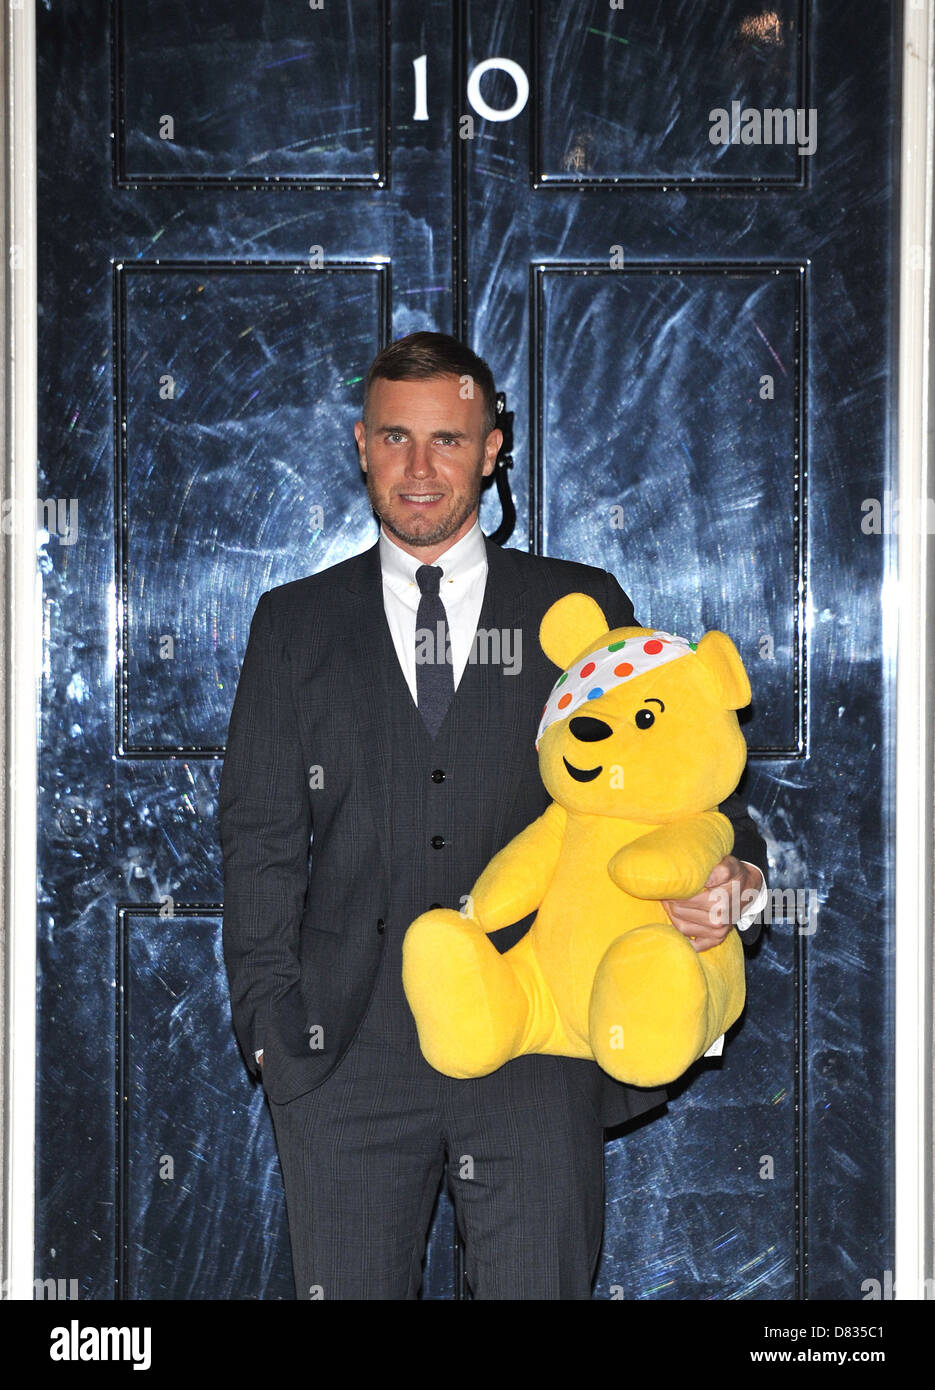 Gary Barlow Children In Need - drinks reception held at 10 Downing Street - Arrivals. London, England - 10.01.12 Stock Photo